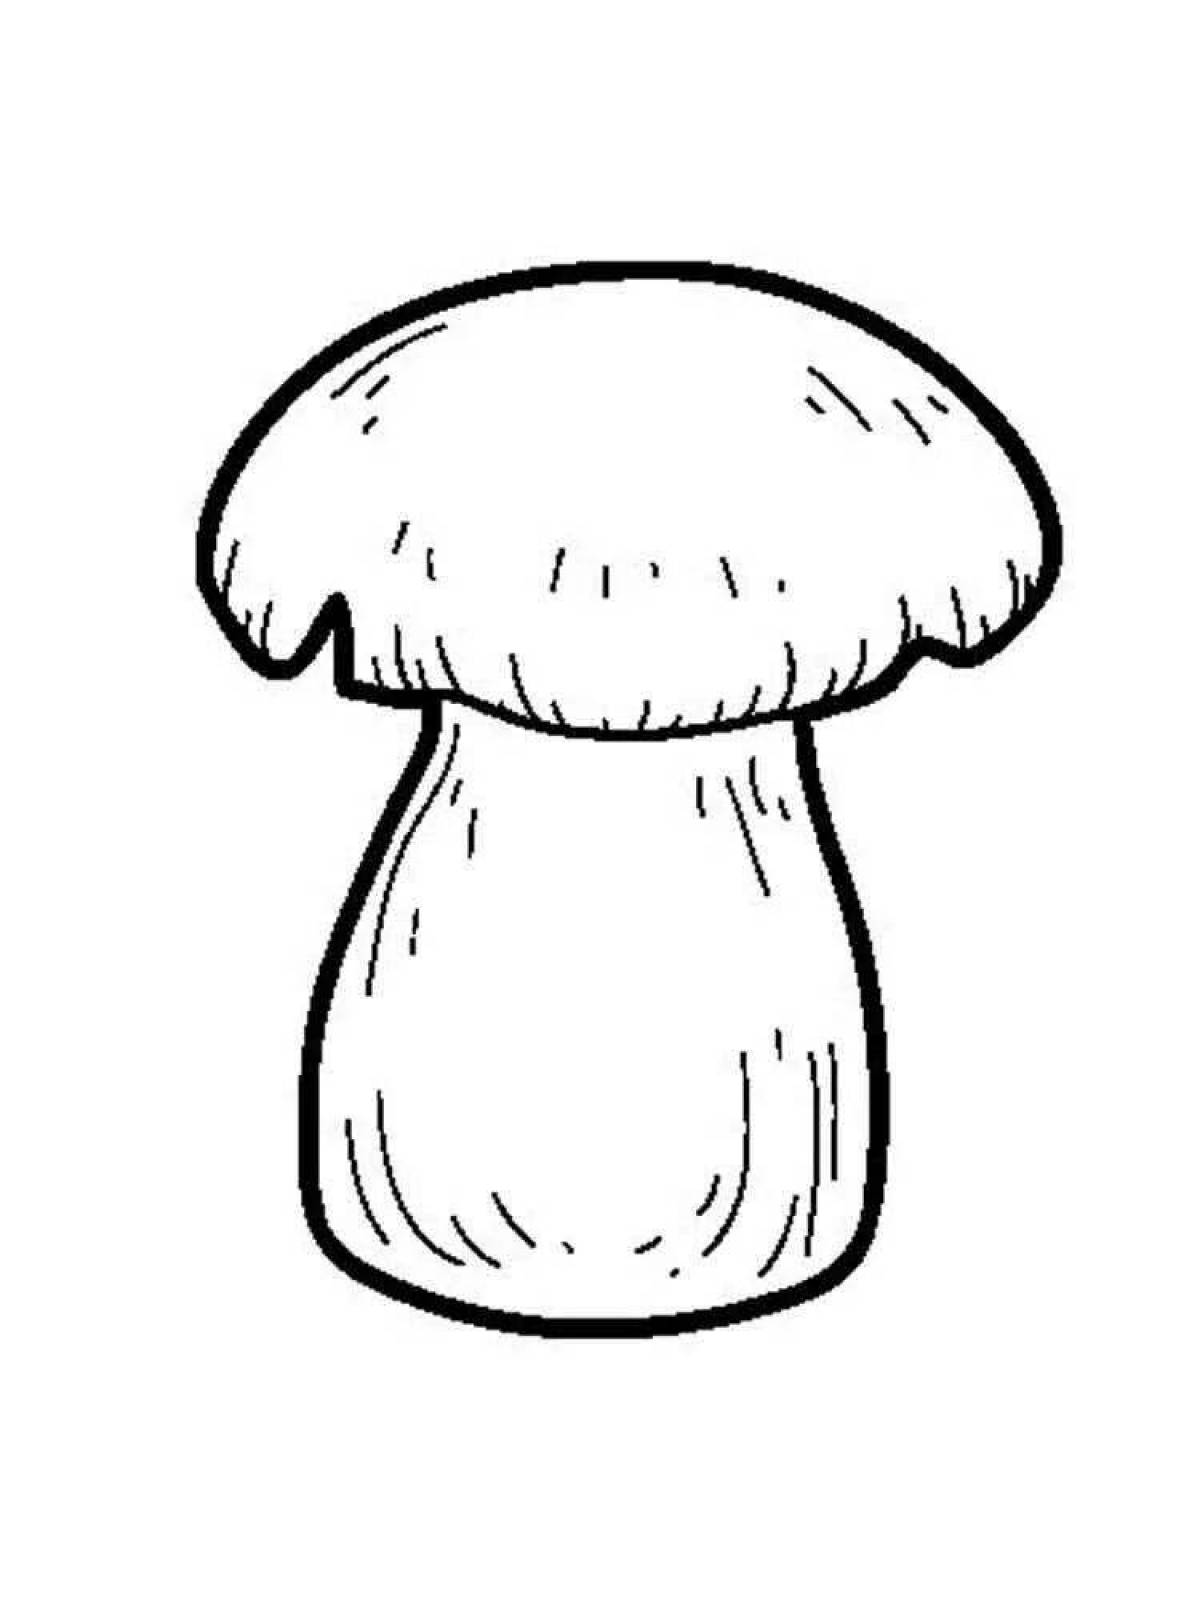 Delightful white mushroom coloring page